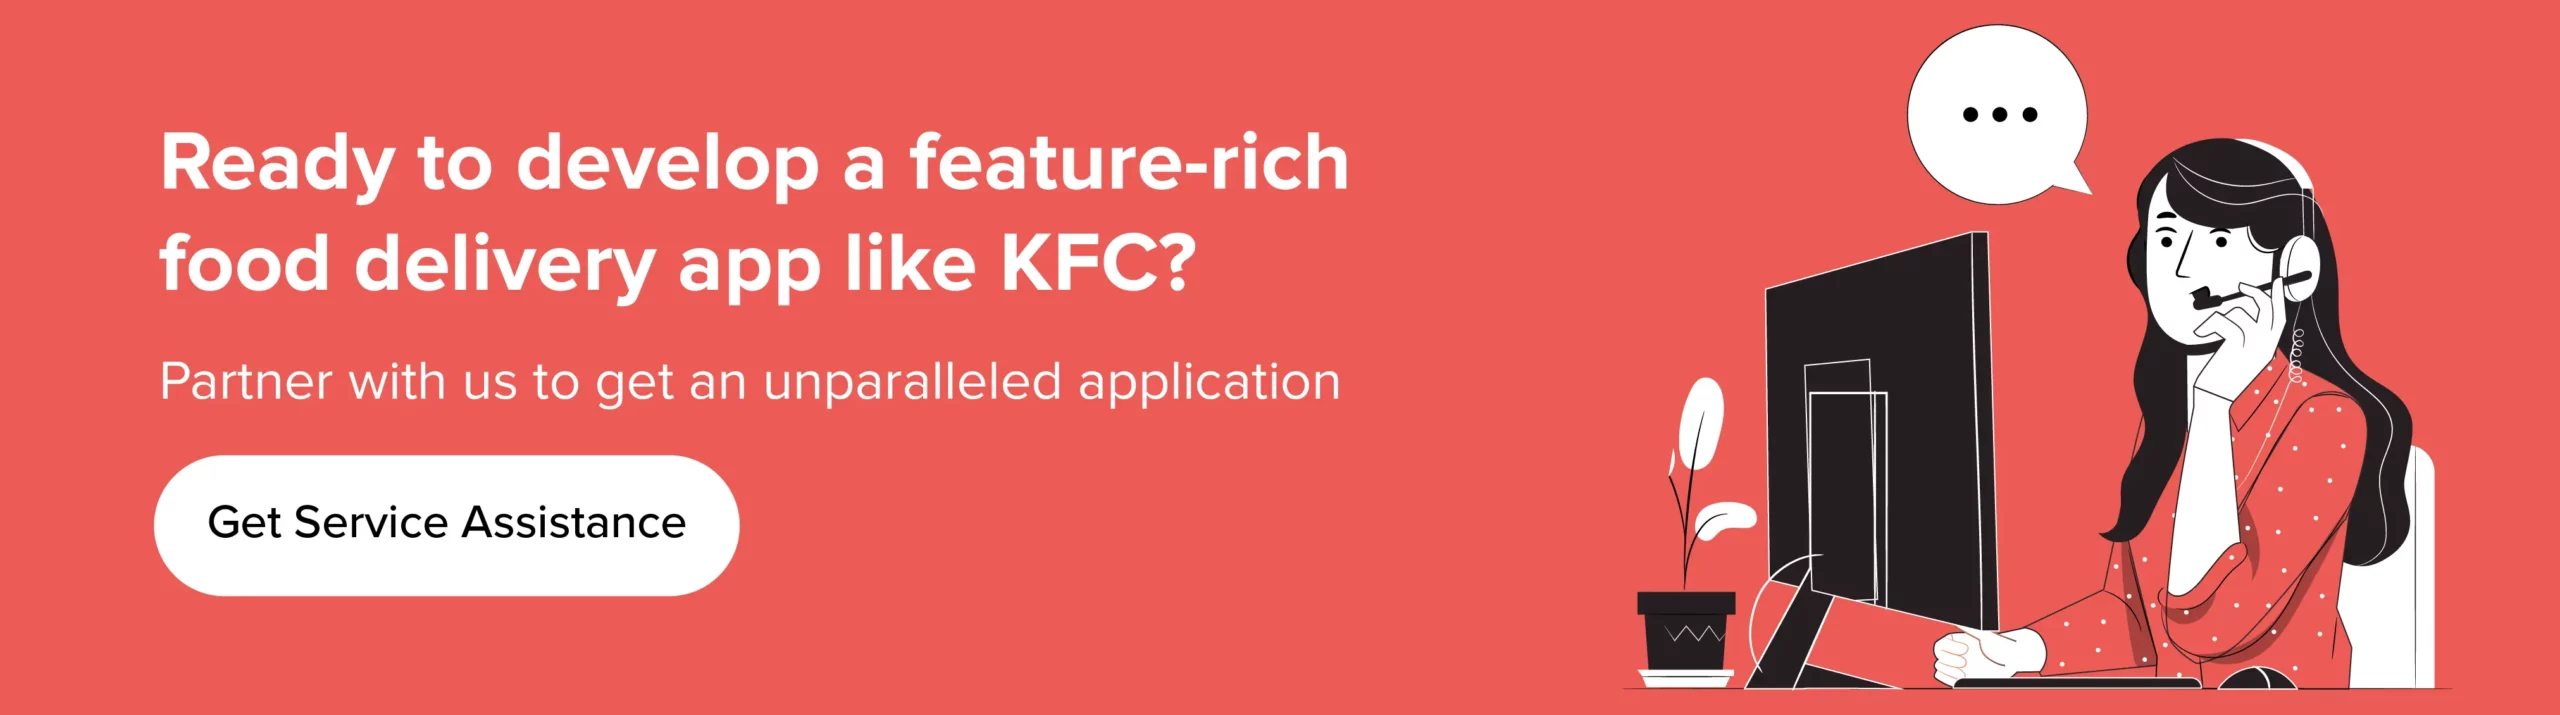 Feature rich food delivery app like KFC